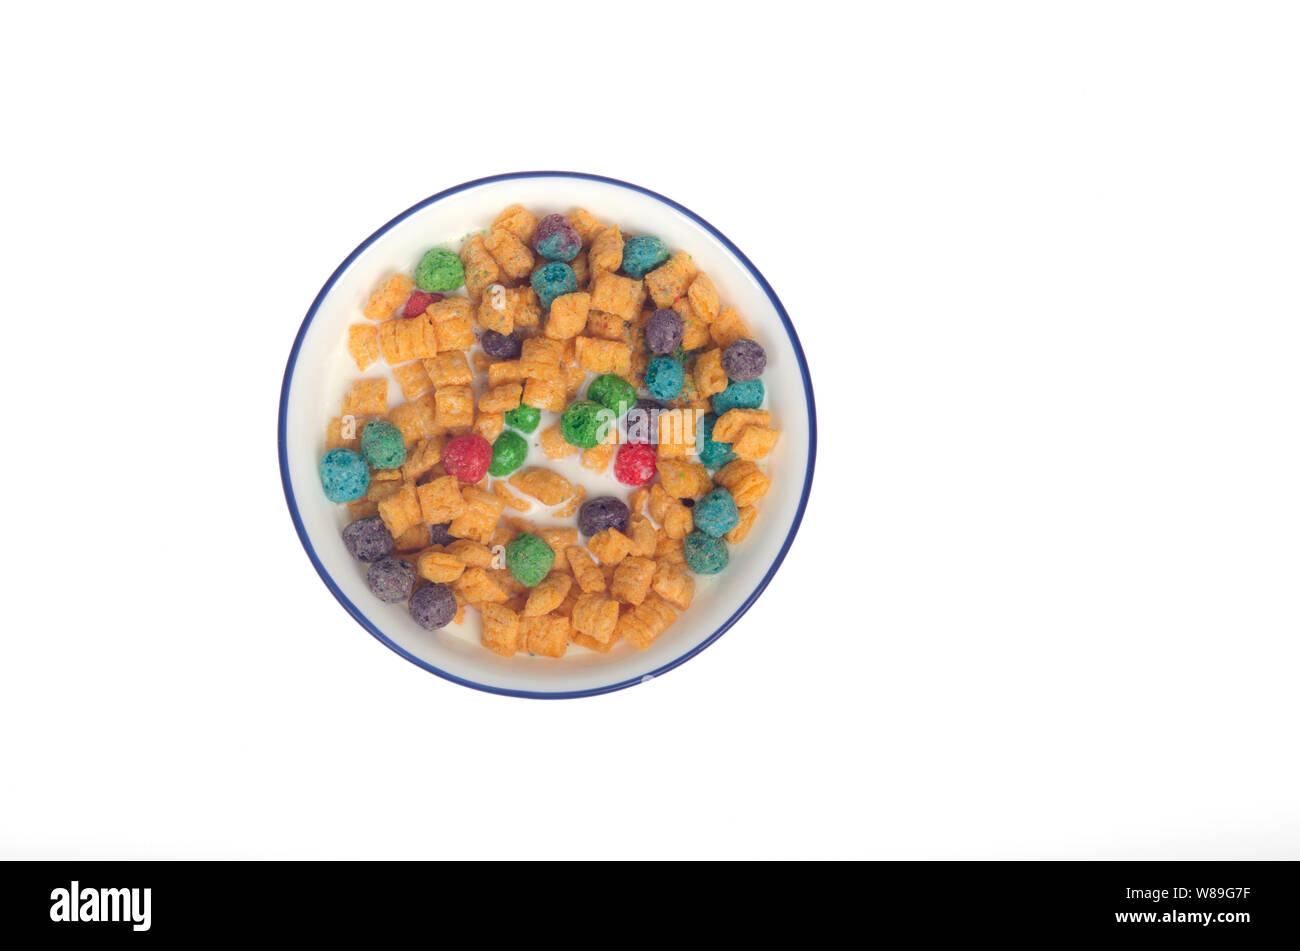 Bowl of Quaker Oats Cap’n Crunch Berries with milk Stock Photo